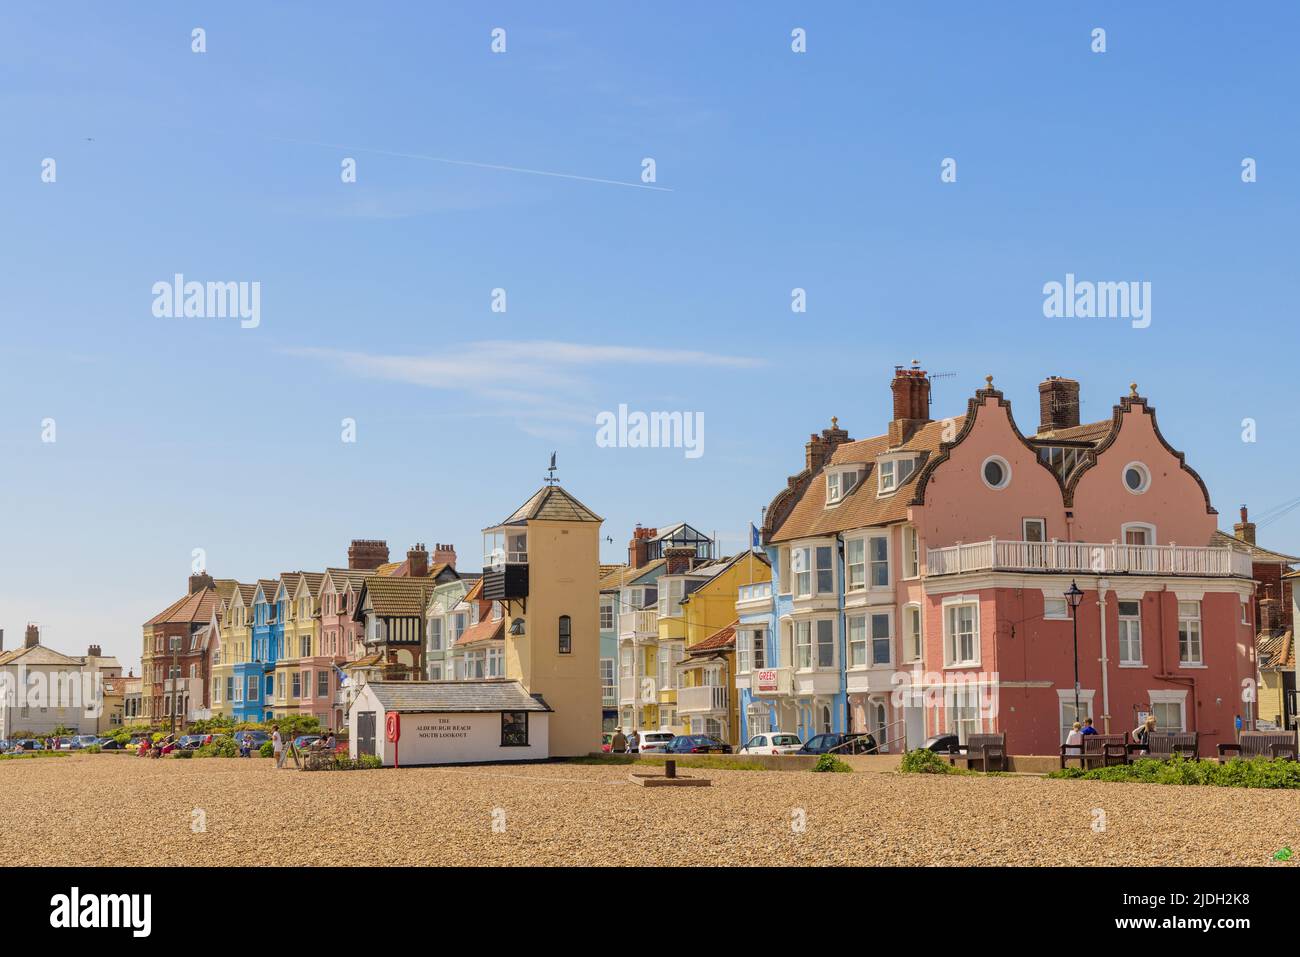 Colourful buildings facing the beach on a sunny day with blue sky. Aldeburgh, Suffolk. UK Stock Photo